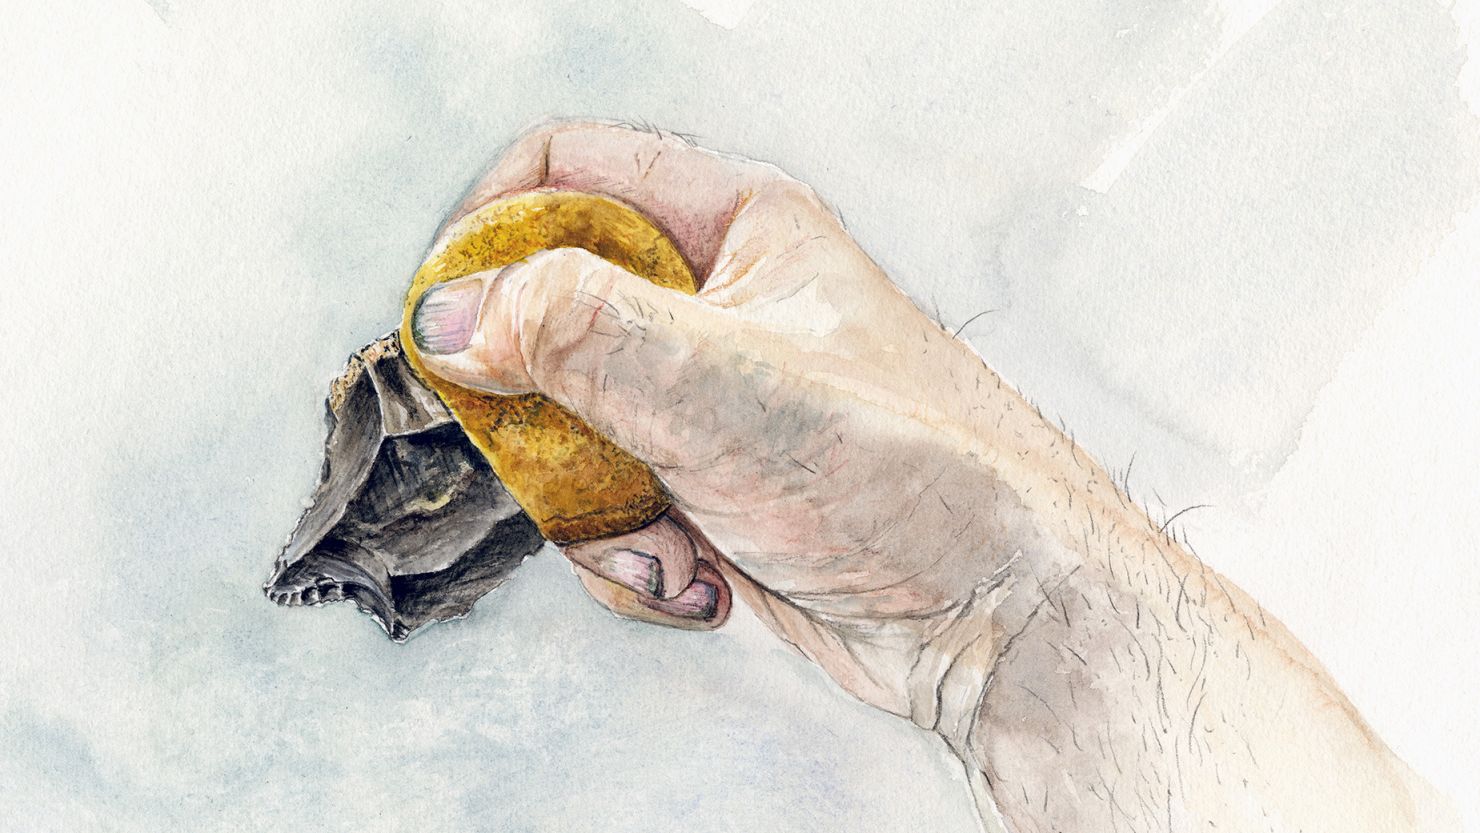 An artist's reconstruction shows how a Neanderthal could hold a stone artifact with an adhesive handle.